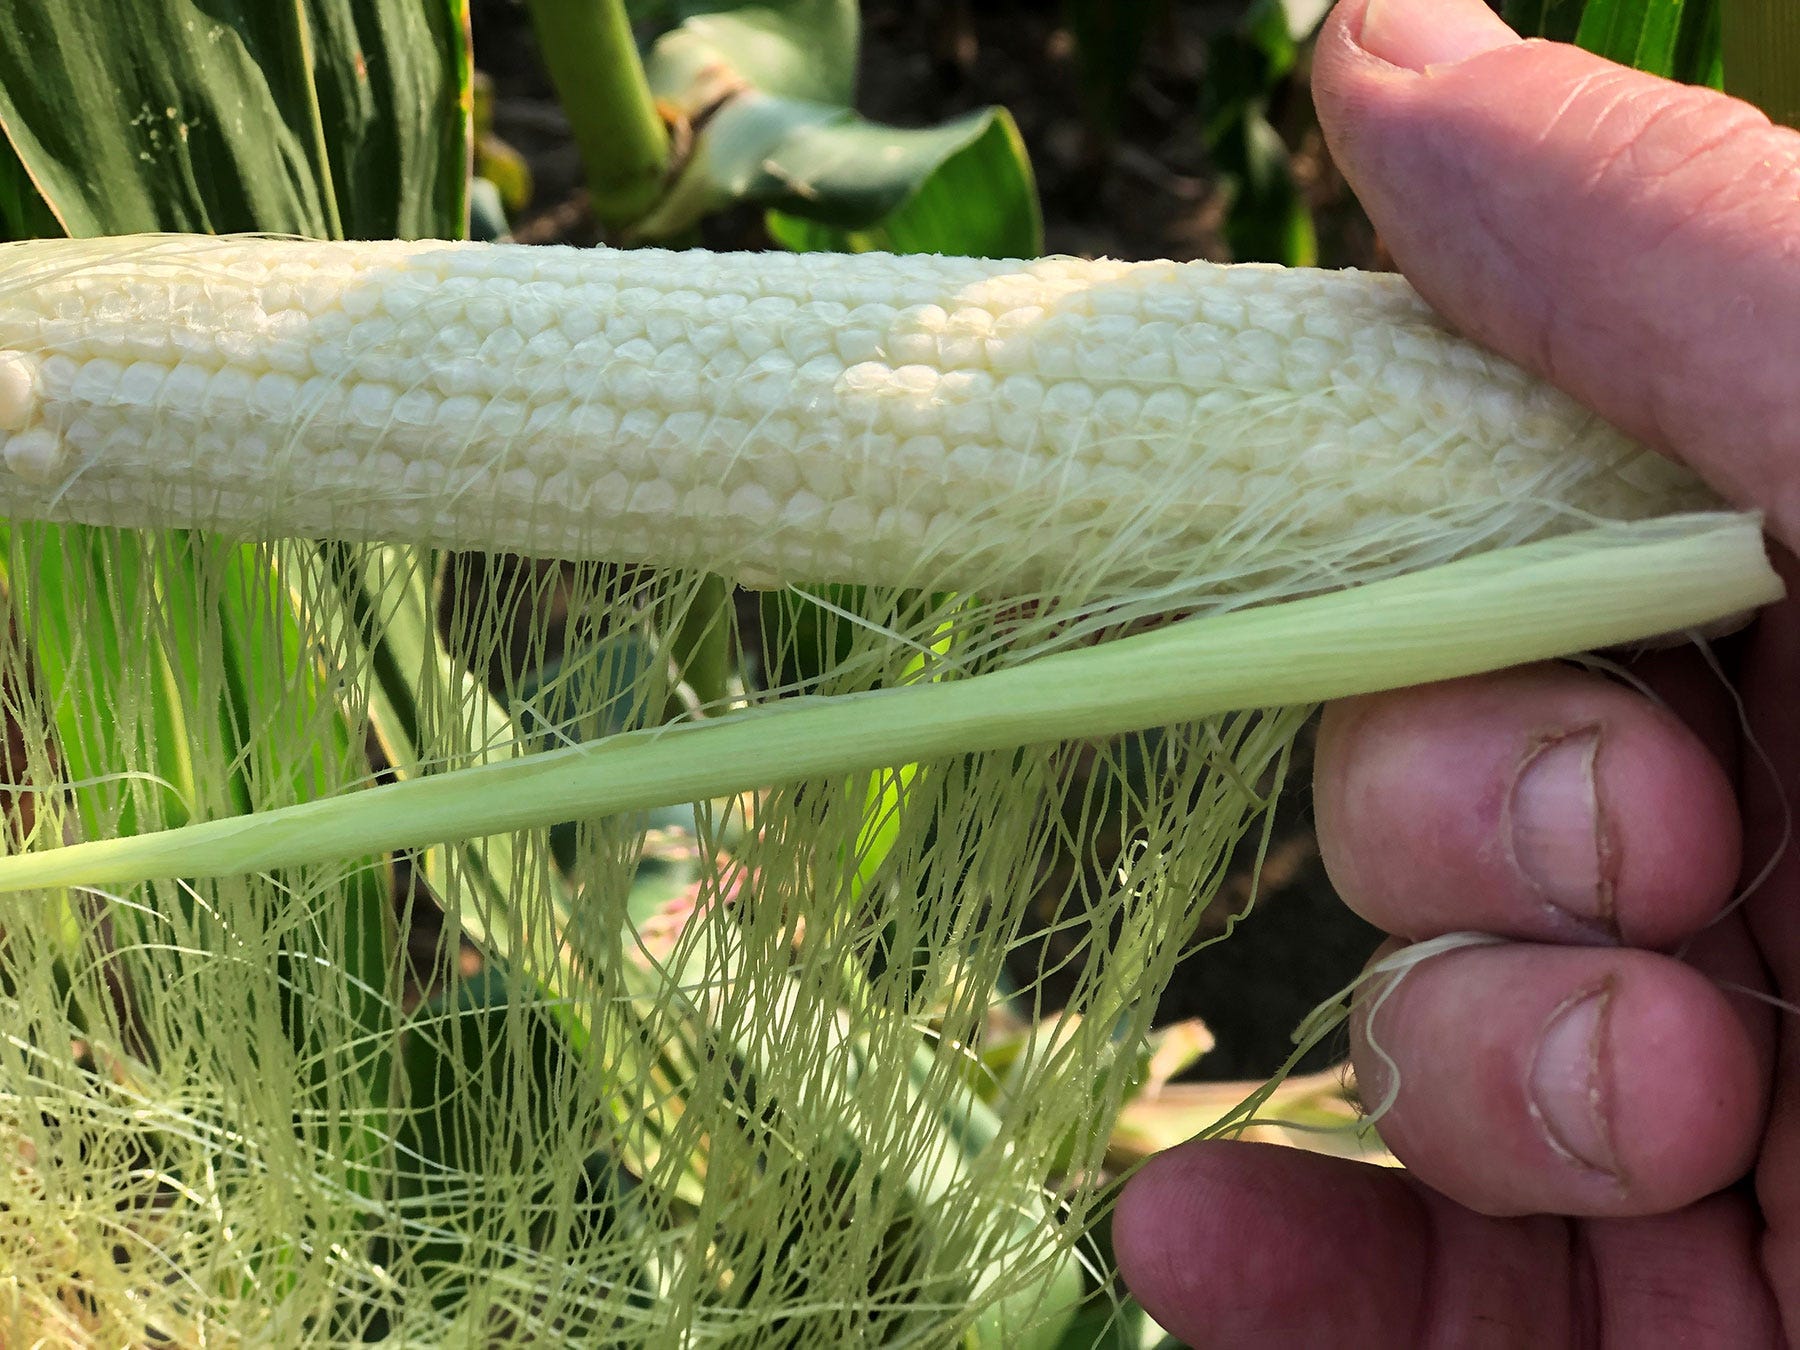 corn cob with silks attached and no kernels